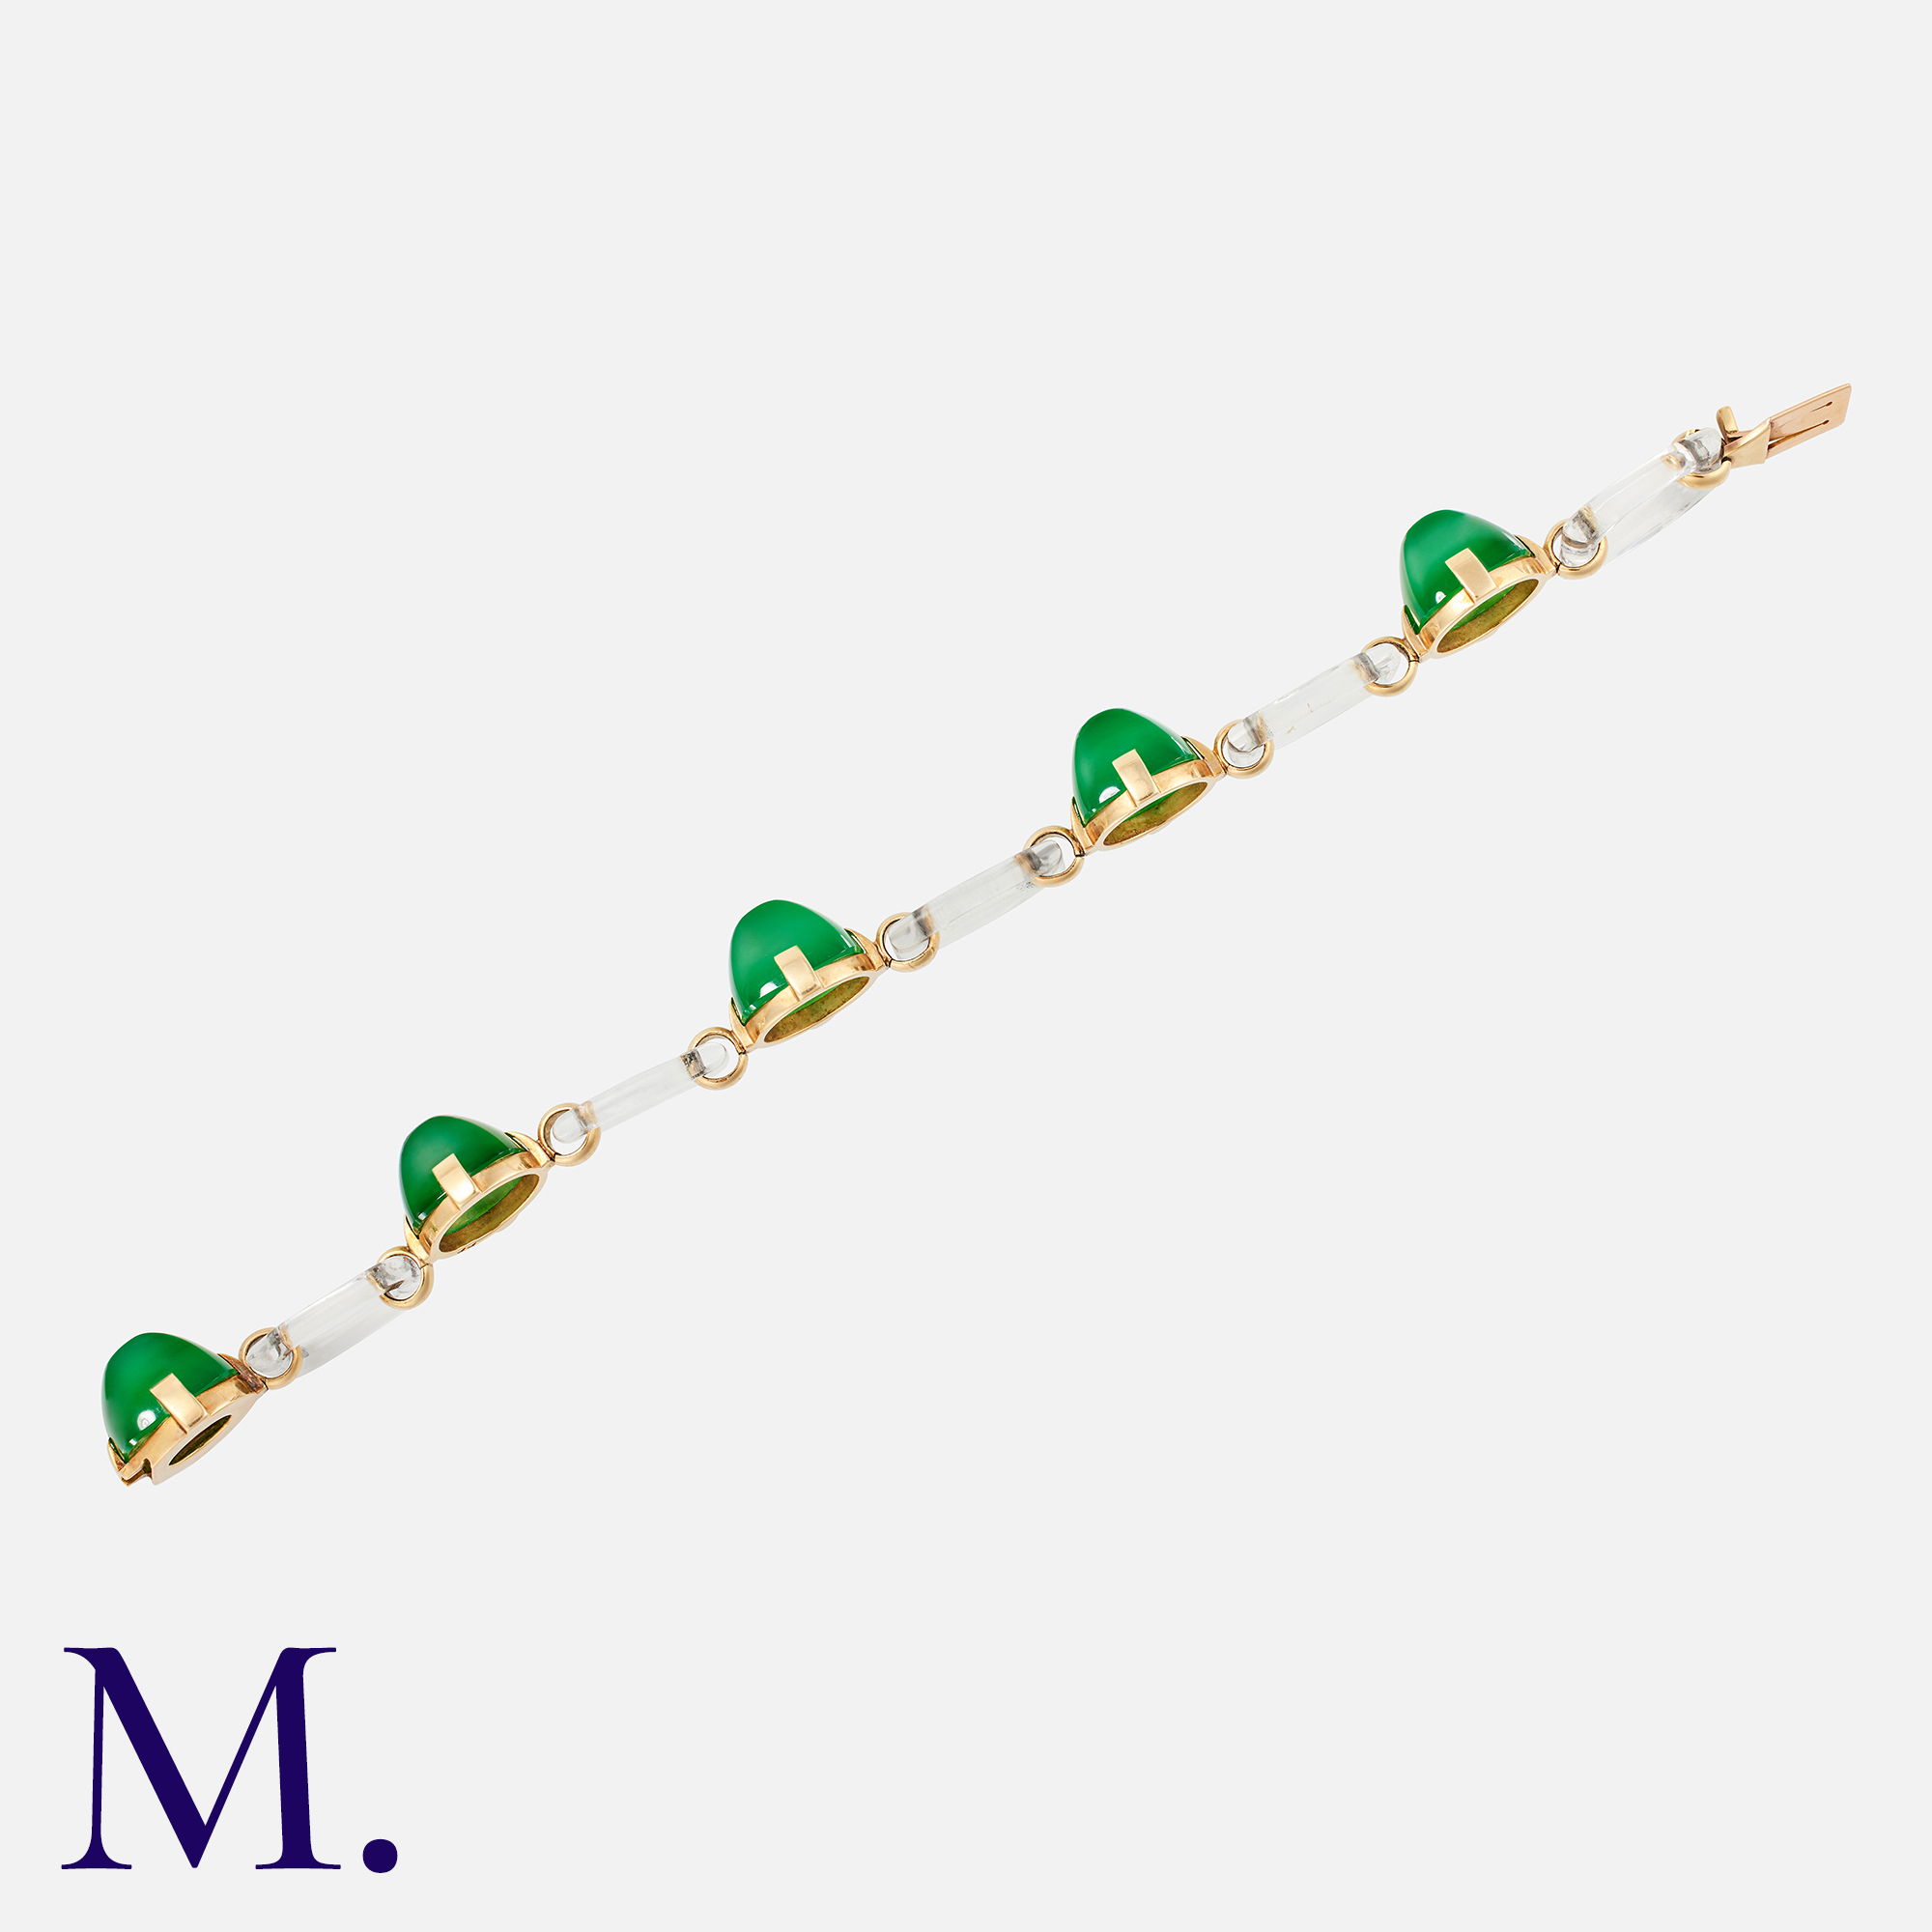 A Crystal and Chrysoprase Bracelet in 18K yellow gold, set with sugarloaf chrysoprase with oval - Image 2 of 2